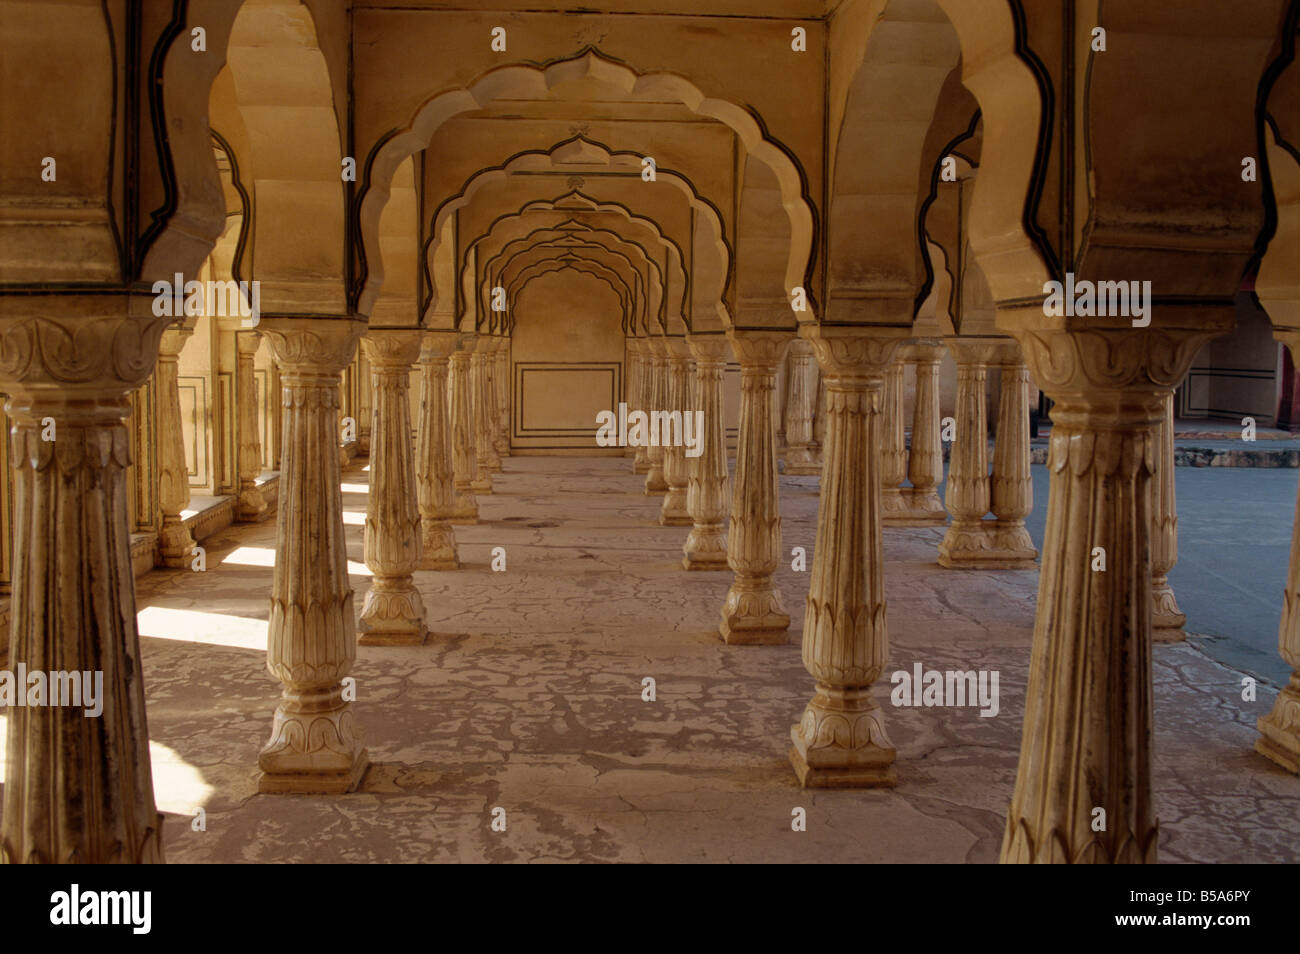 Interior of Amber Fort and Palace built by Maharajah Man Singh in 1592 Jaipur Rajasthan state India Asia Stock Photo